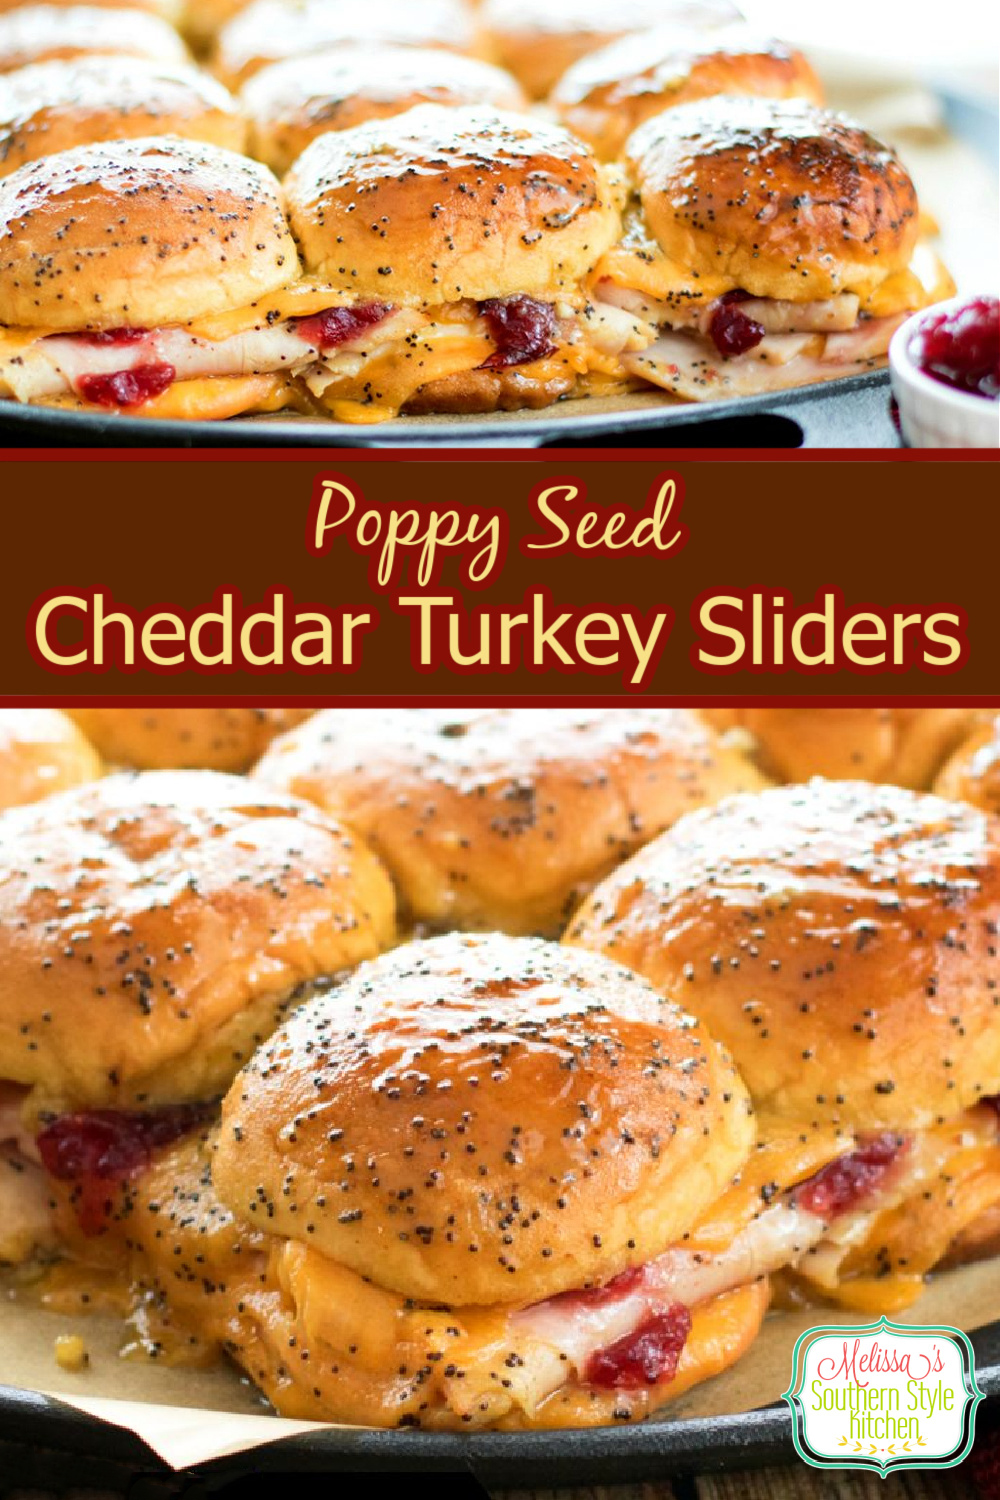 Insanely delicious Poppy Seed Cheddar Turkey Sliders can be served as an appetizer or casual meal #turkeysliders #cranberries #turkeyrecipes #dinner #dinnerideas #sliders #turkey #turkeysandwiches #leftoverturkeyrecipes #southernfood #southernrecipes #fallbaking #thanksgiving #cranberrysauce #recipes